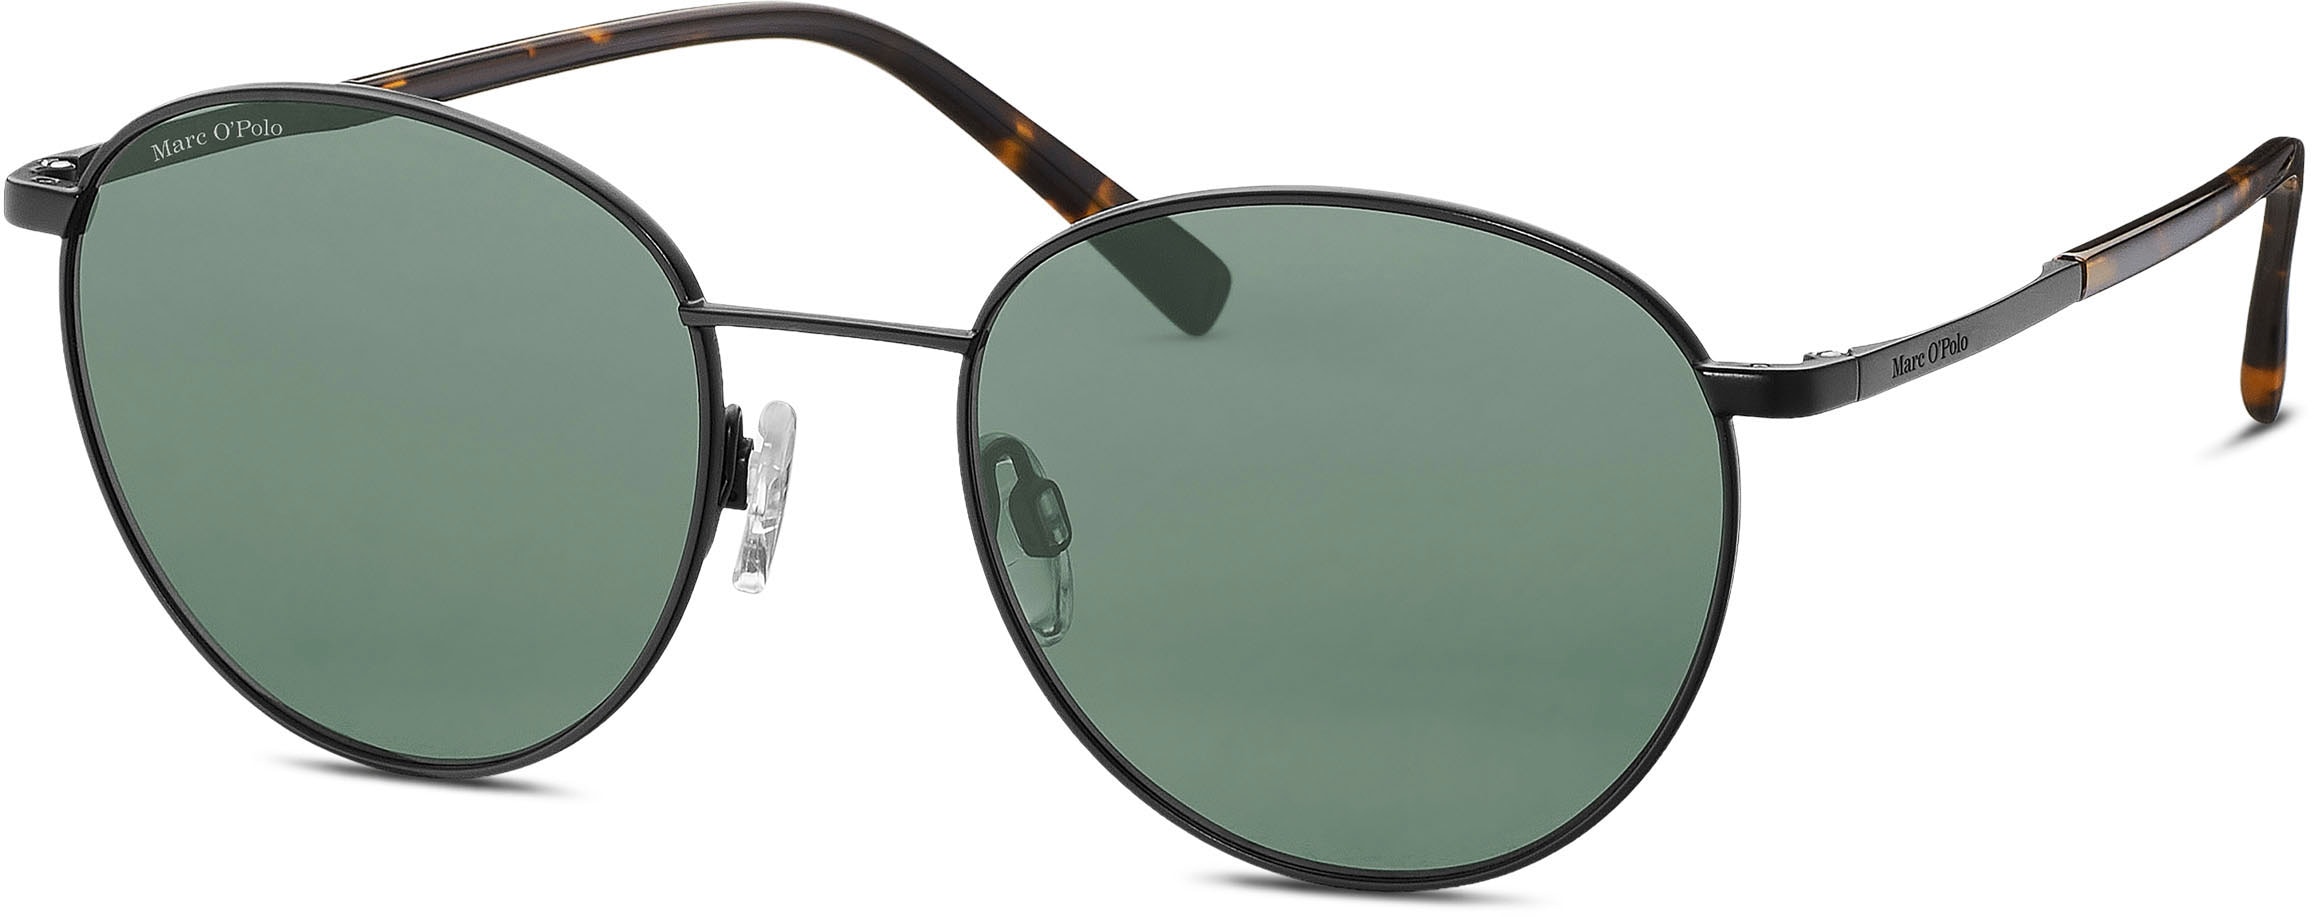 Marc OPolo Sonnenbrille "Modell 505112", Panto-Form